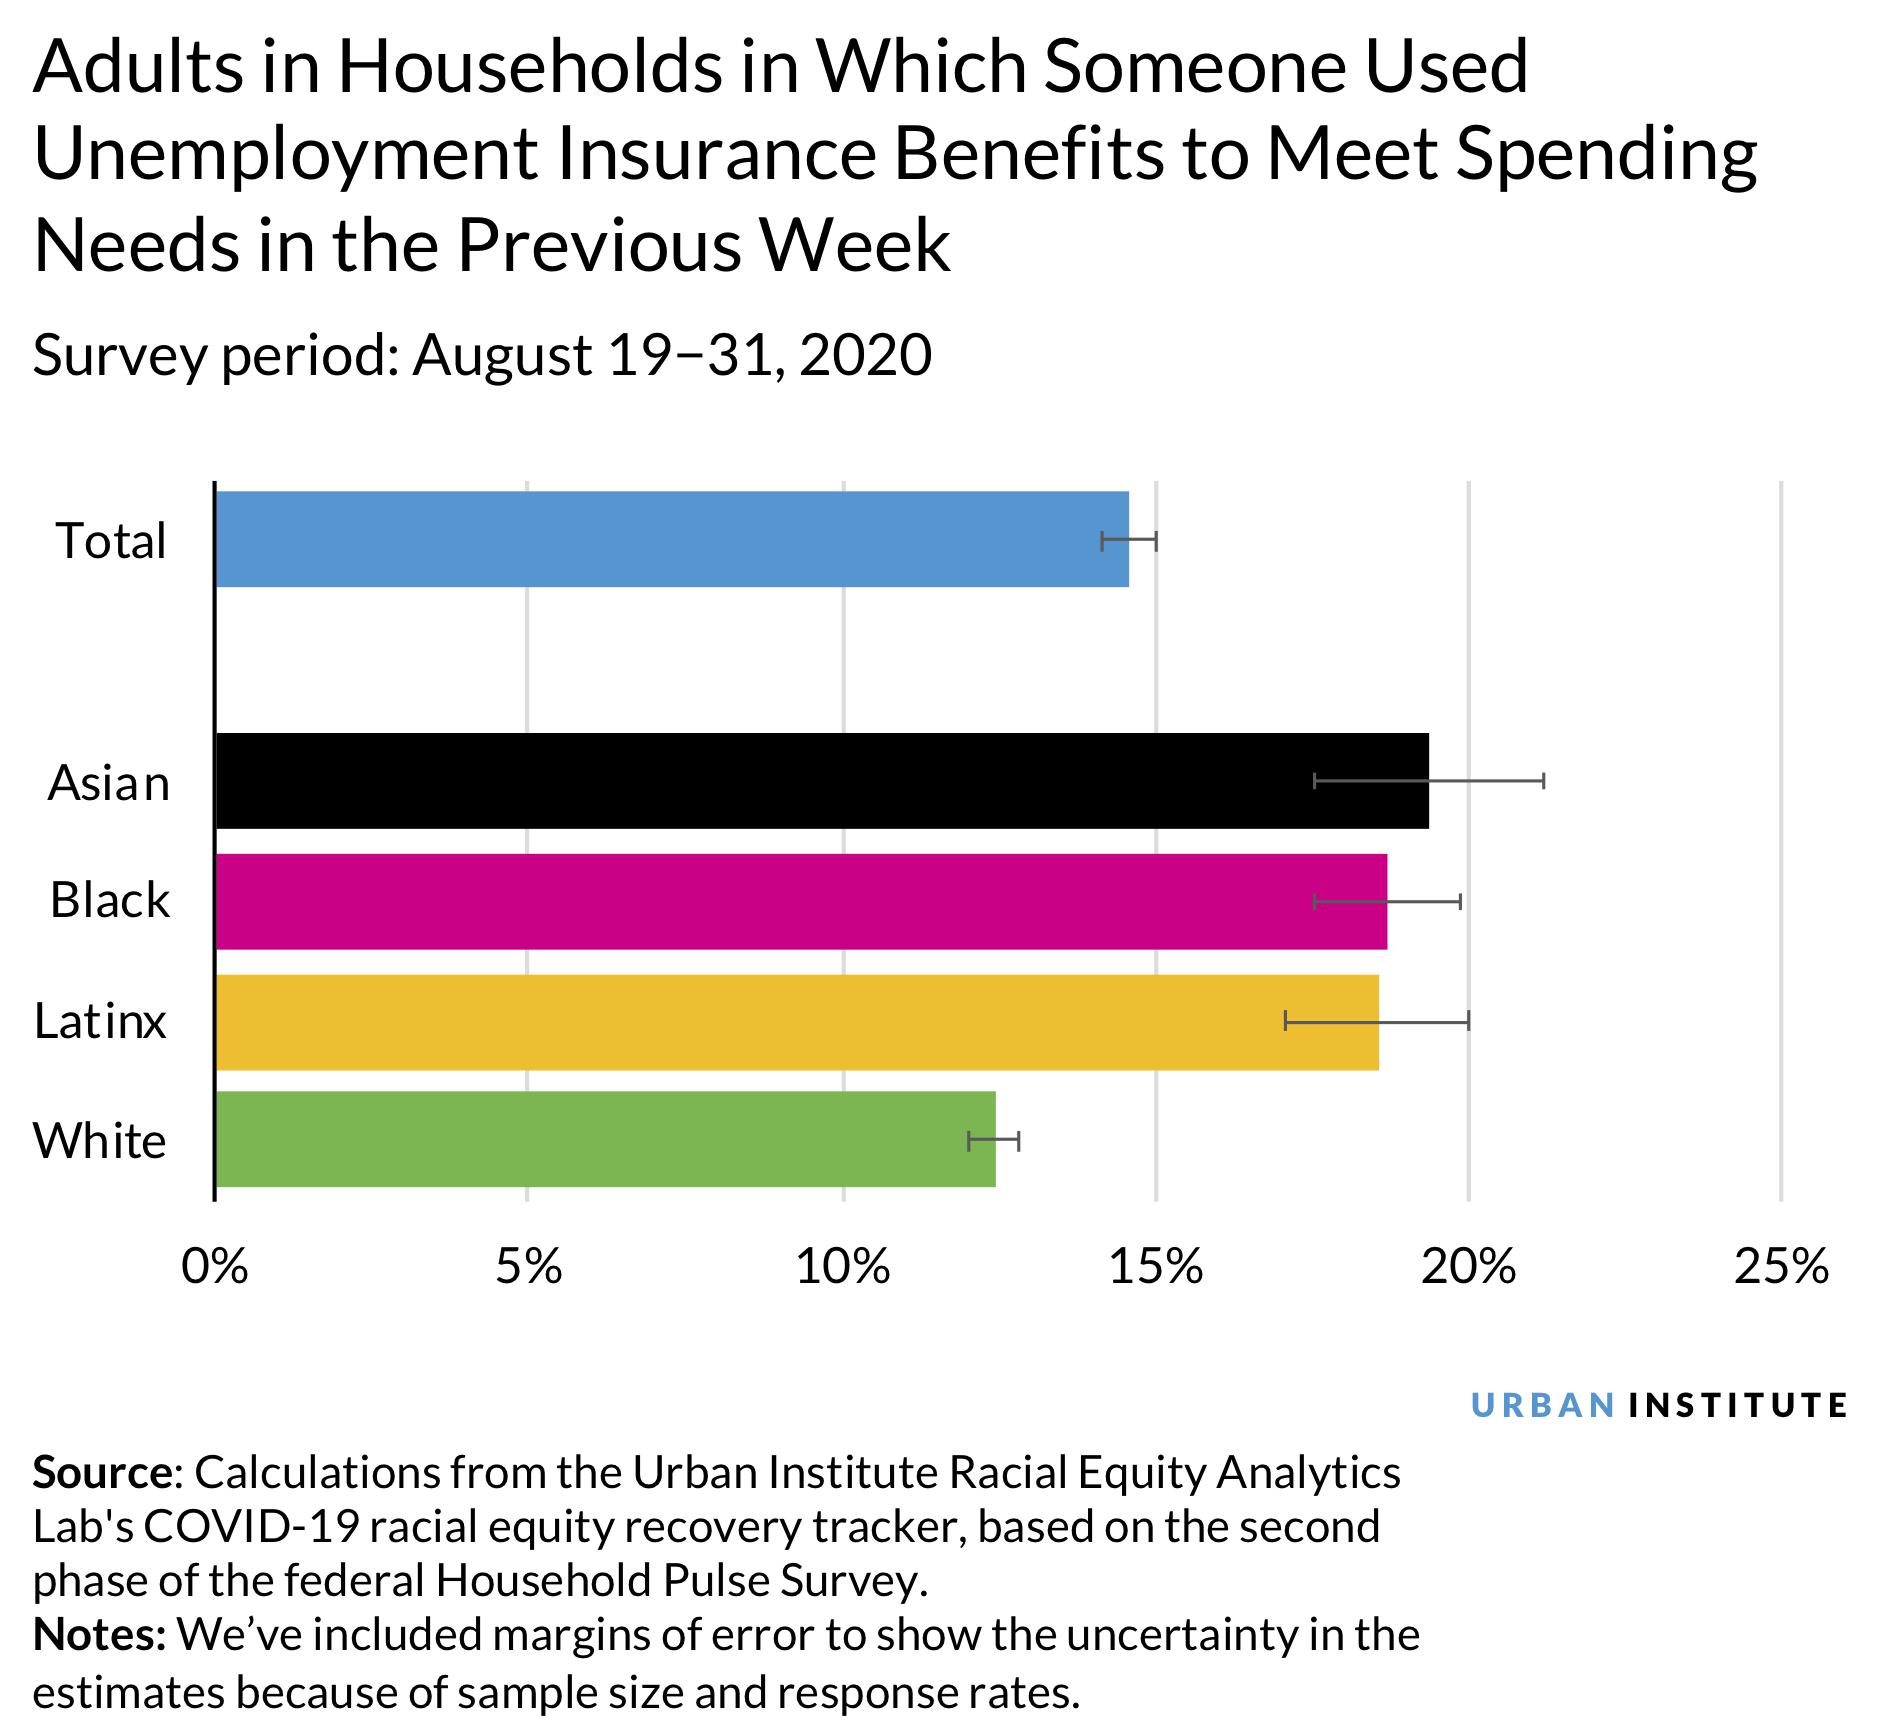 Adults in Households in Which Someone Used Unemployment Insurance Benefits to Meet Spending Needs in the Previous Week